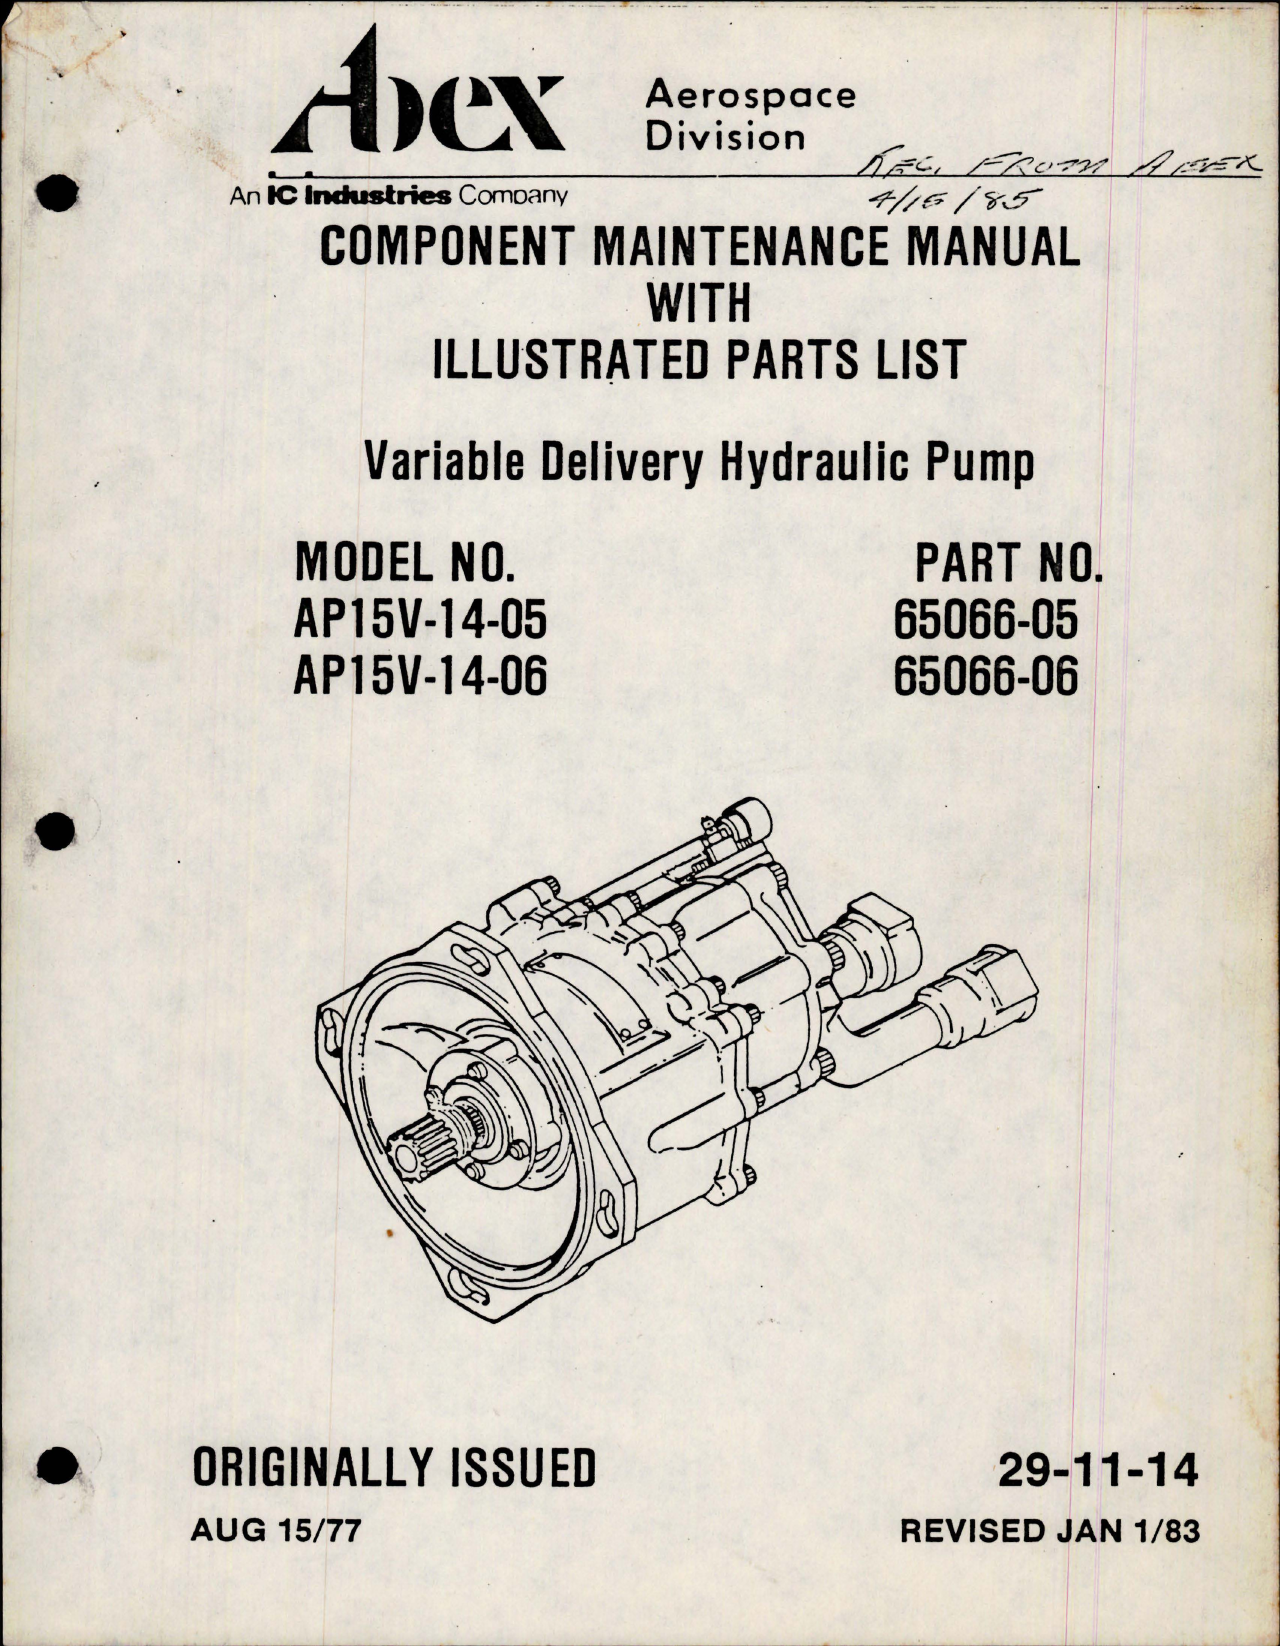 Sample page 1 from AirCorps Library document: Maintenance Manual with Parts List for Variable Delivery Hydraulic Pump - Parts 65066-05 and 65066-06 